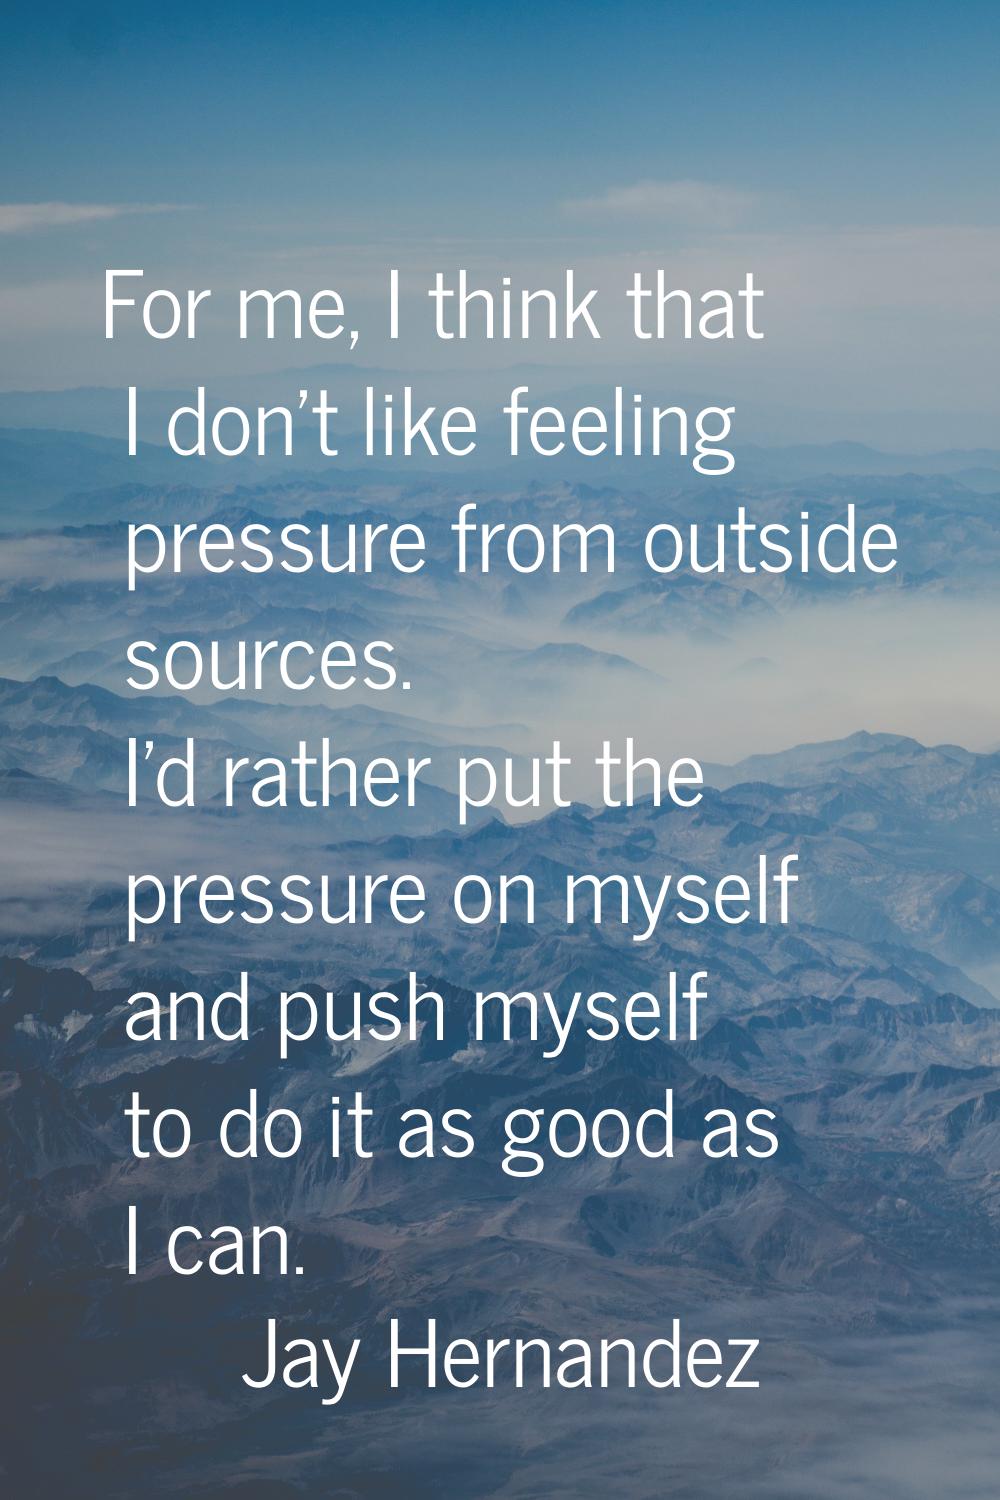 For me, I think that I don't like feeling pressure from outside sources. I'd rather put the pressur